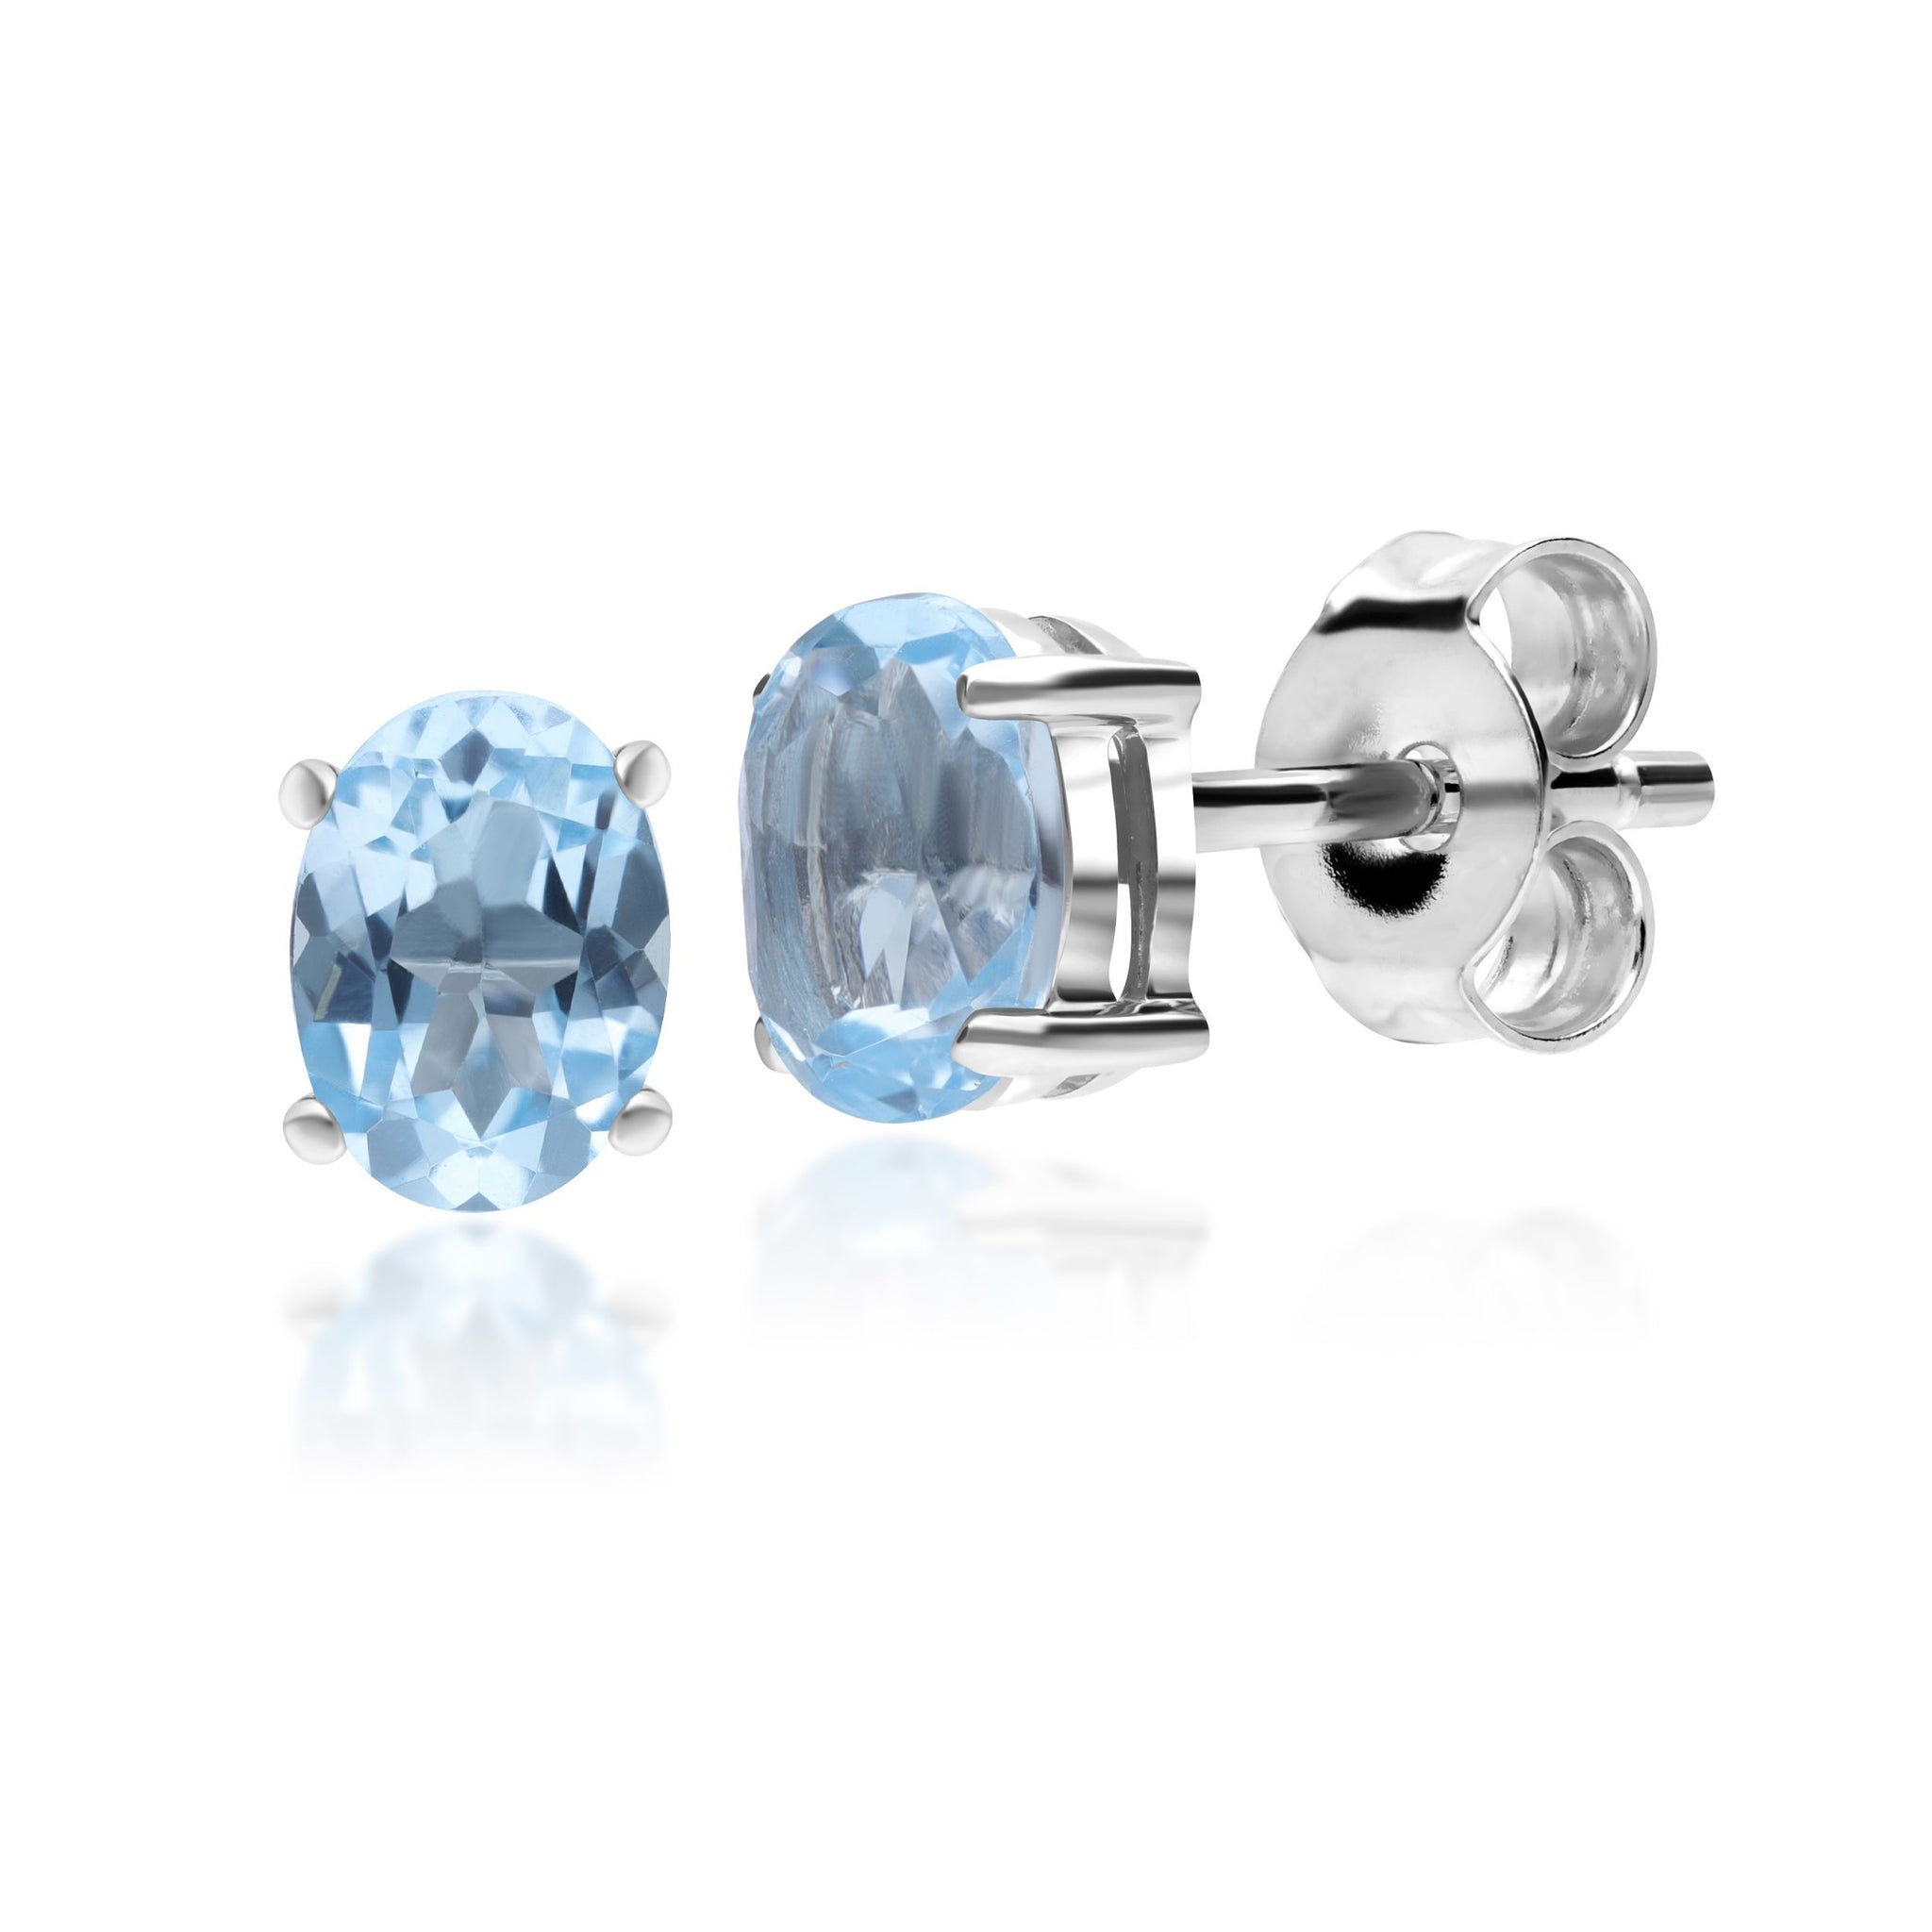 Classic Oval Blue Topaz Stud Earrings in 9ct White Gold 7x5mm